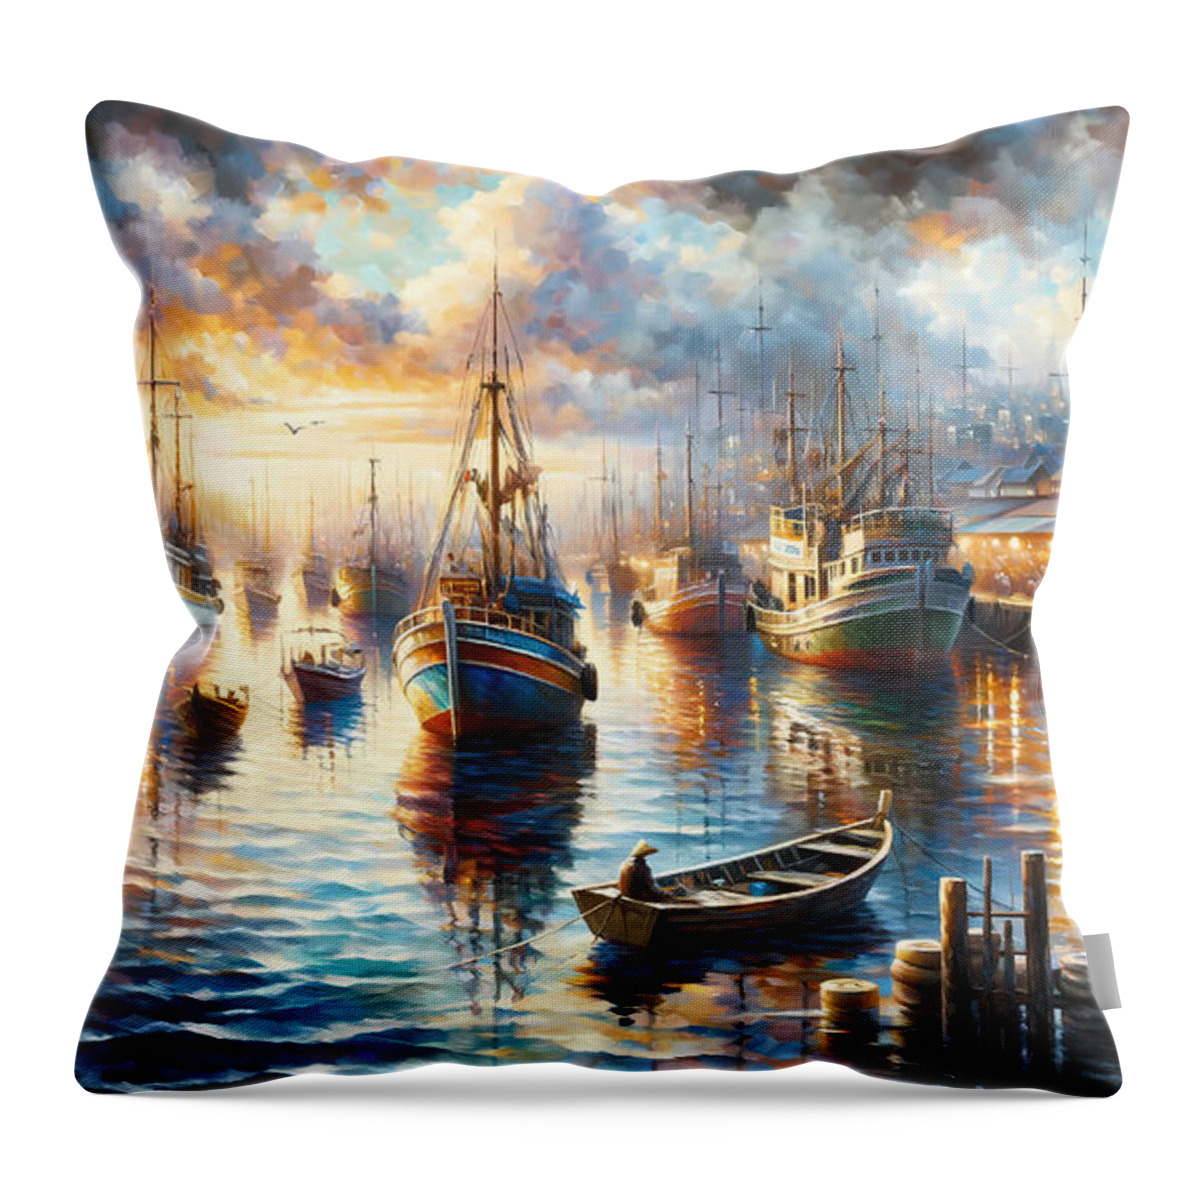 Vibrant Throw Pillow featuring the painting A vibrant bustling harbor with boats and reflections in the water by Jeff Creation